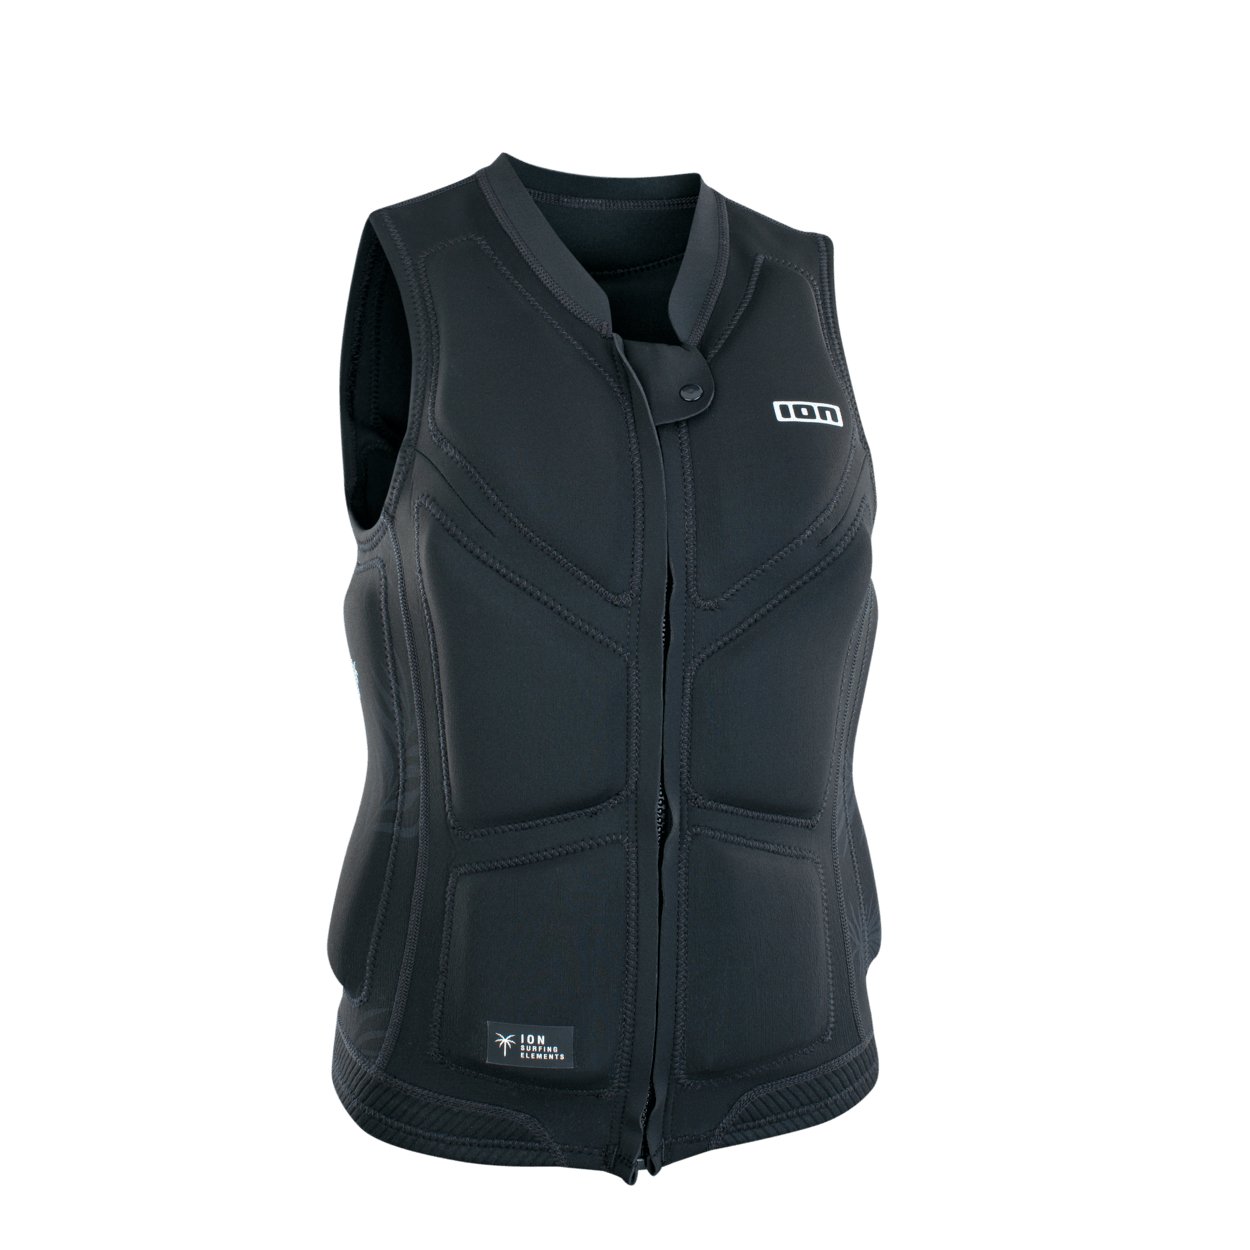 ION Lunis Vest Front Zip 2022 - Worthing Watersports - 9010583050775 - Protection - ION Water